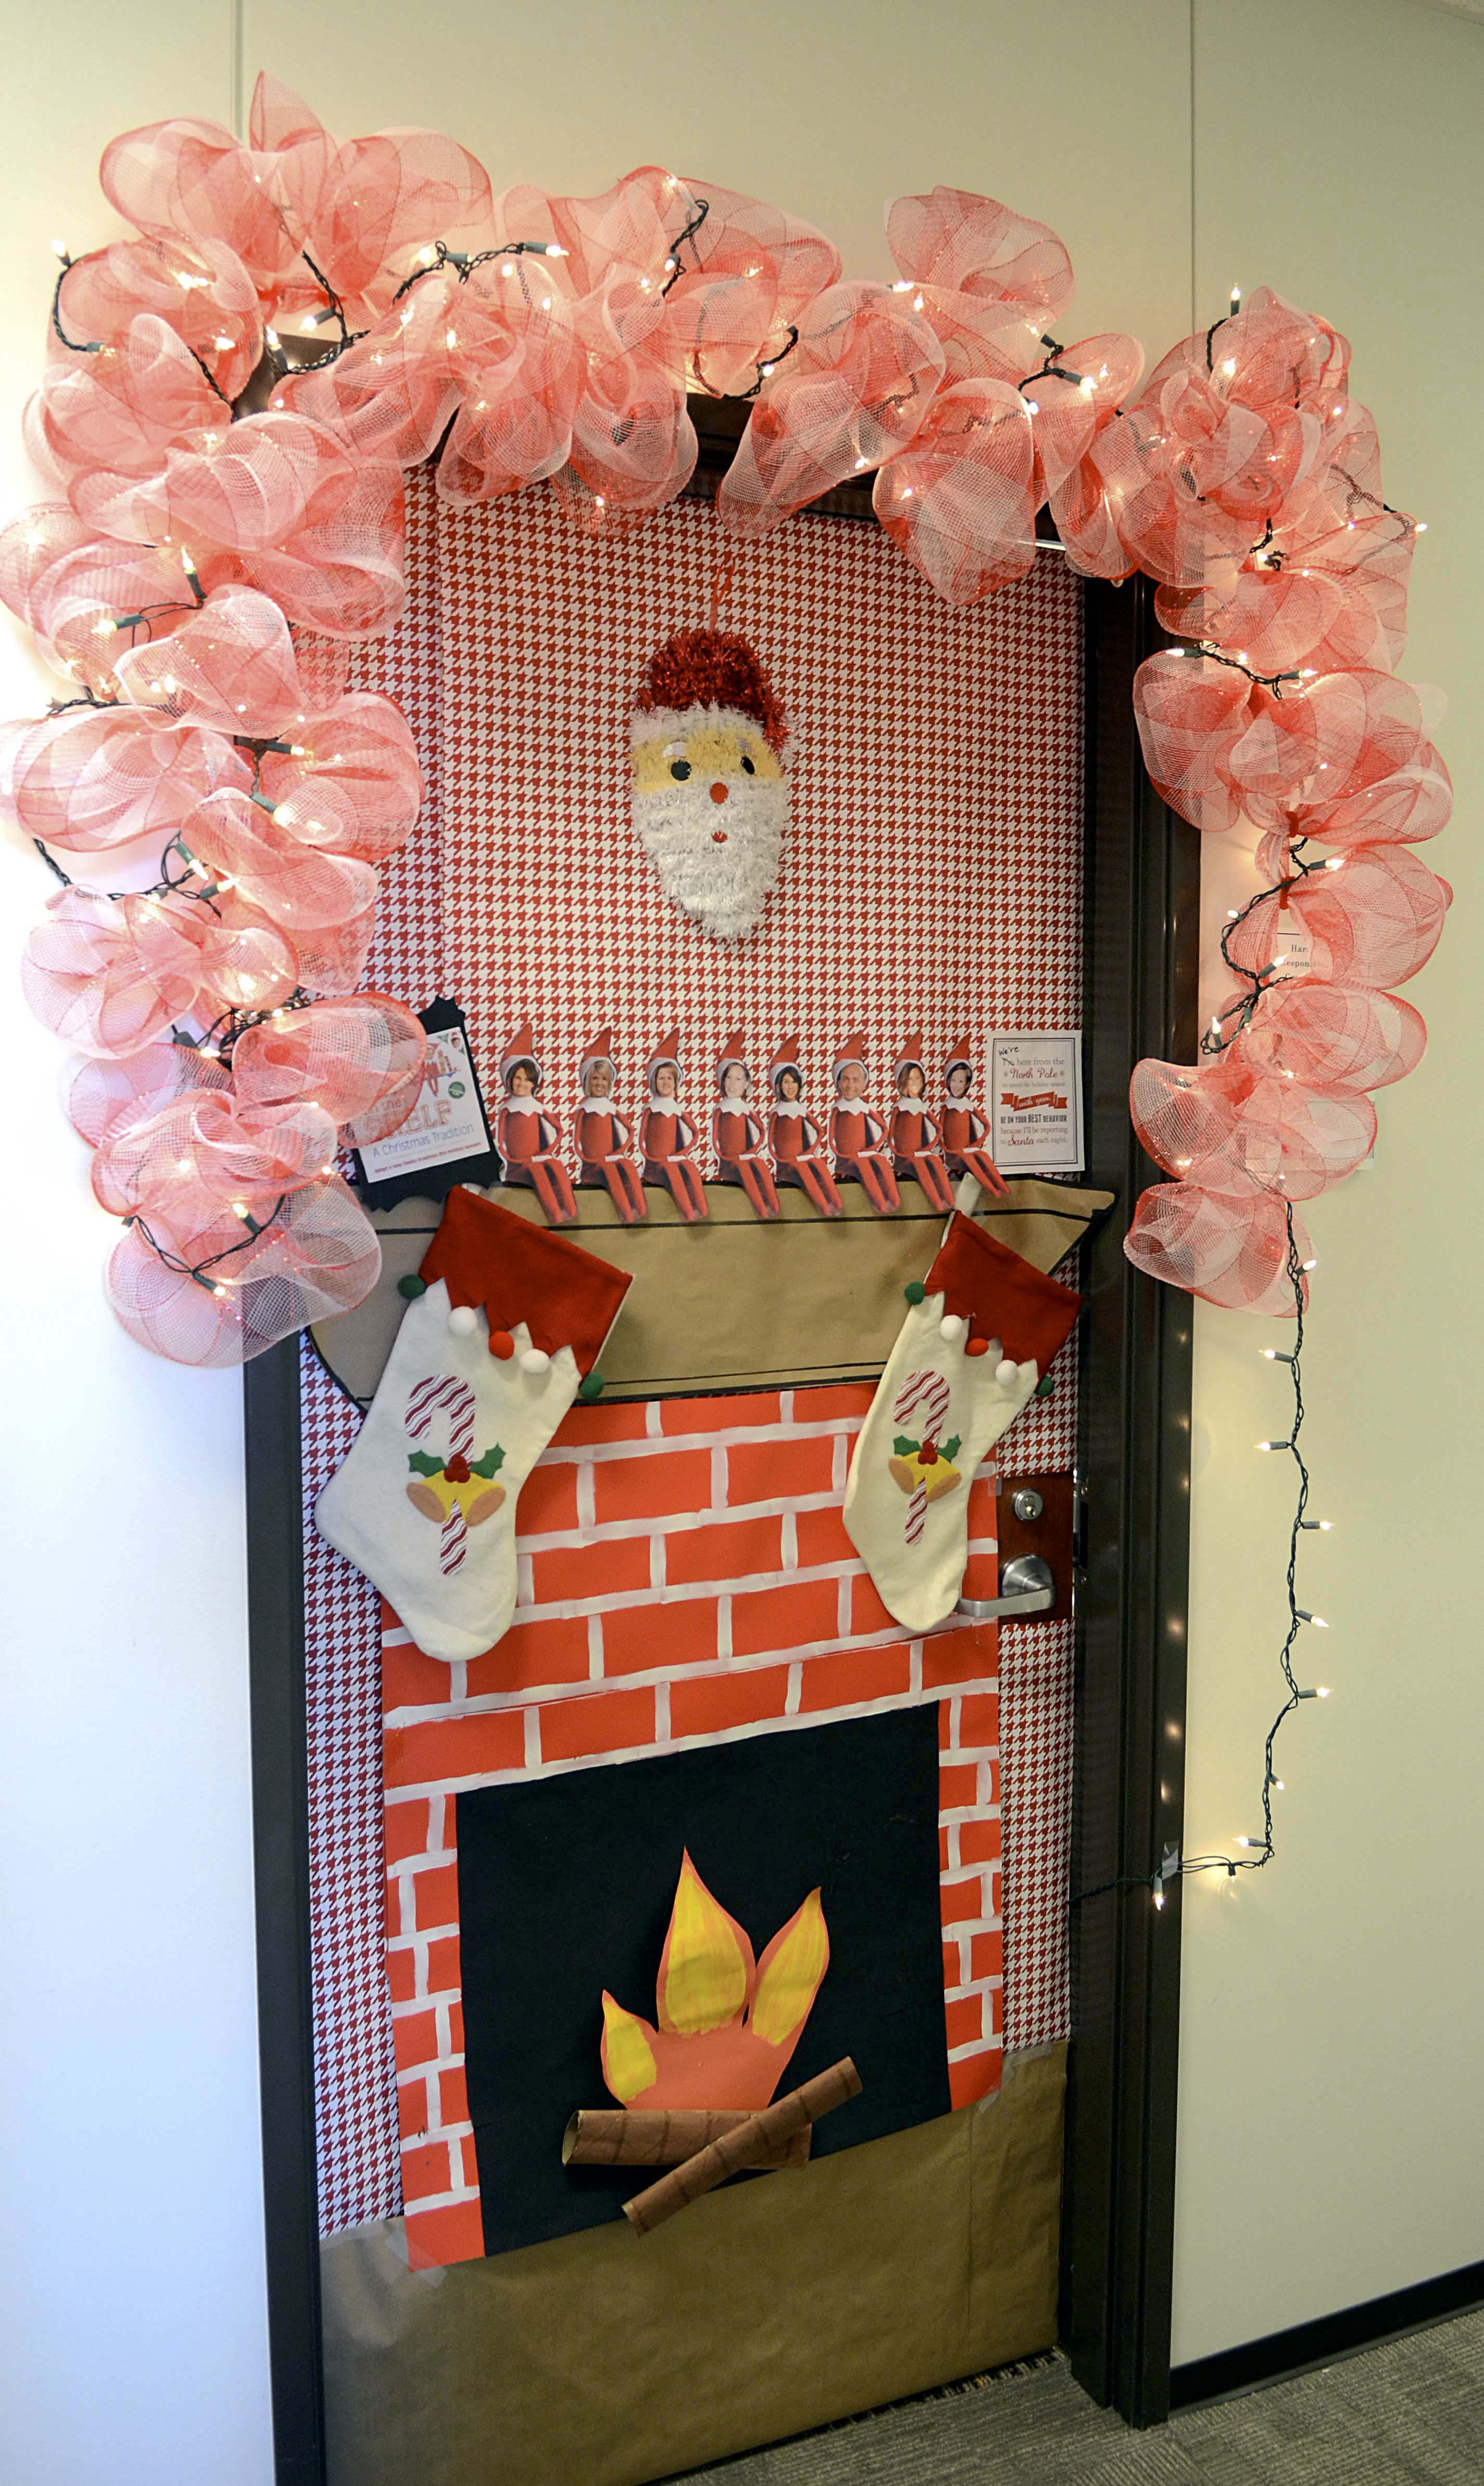 Fireplace Christmas Door Decorations
 Door Decoration Contest Sparks New TTI Tradition — Texas A